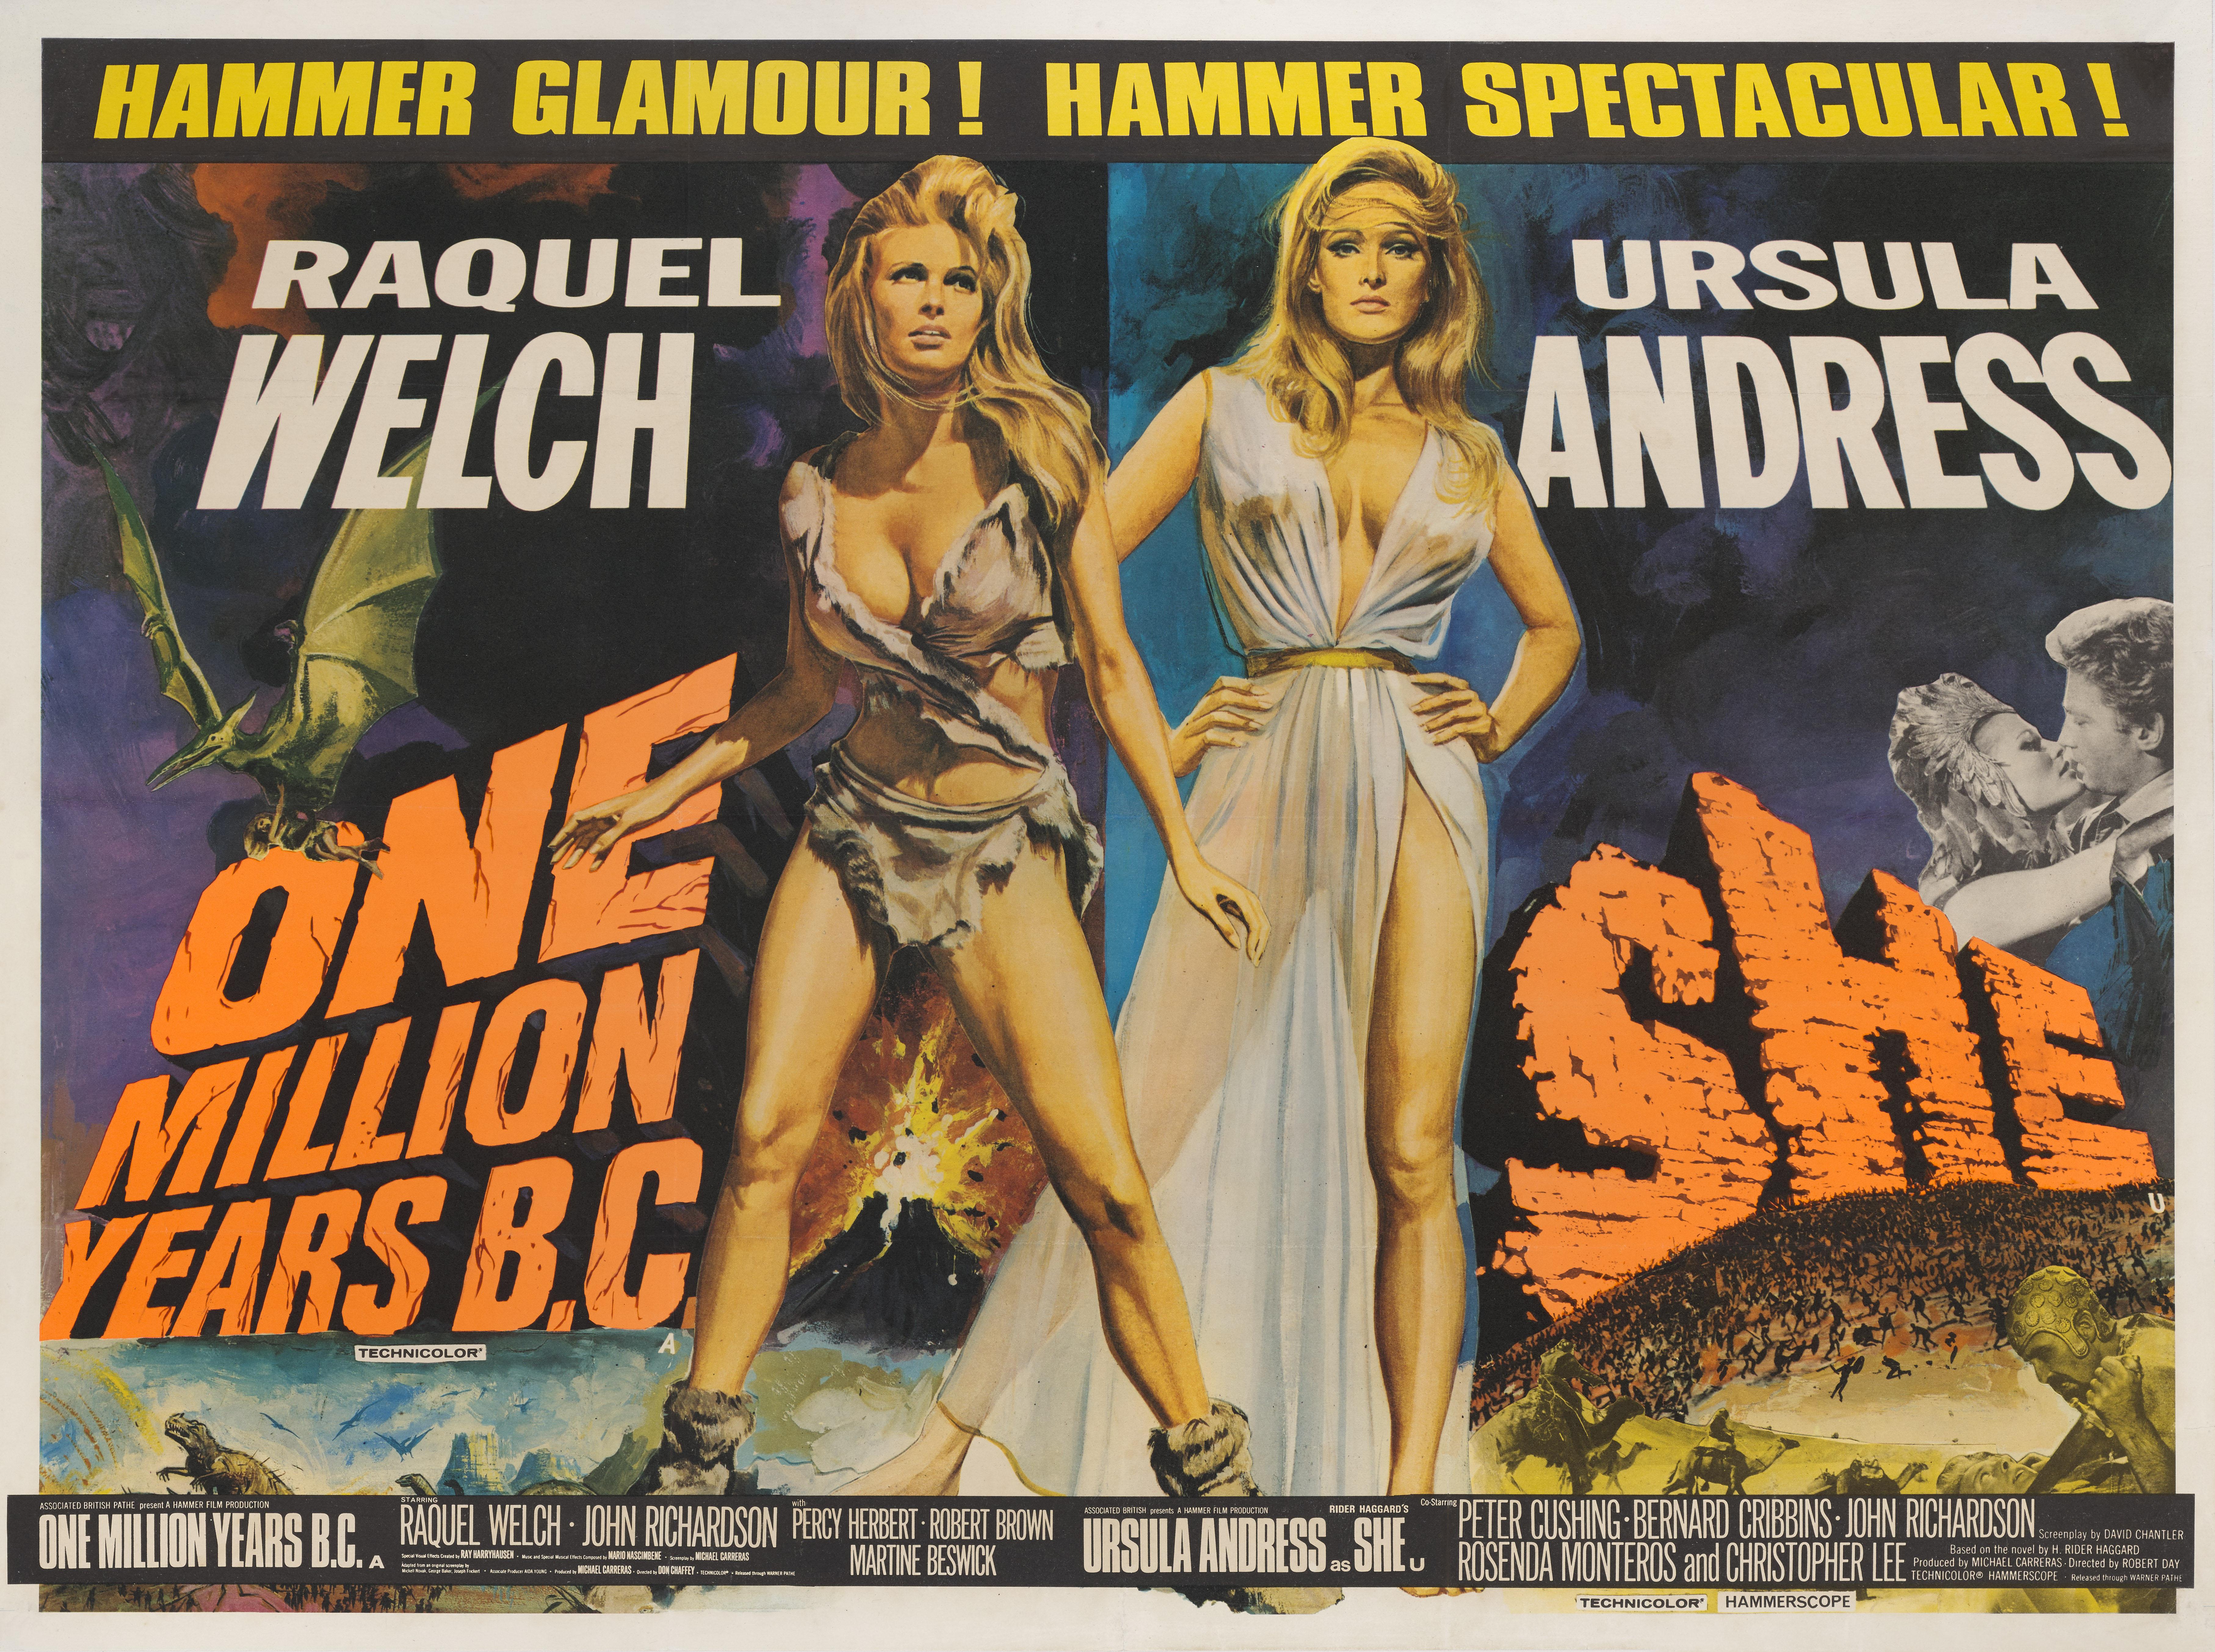 Original British movie poster used to advertise a double bill film showing Raquel Welch's 1965 and 1966 fantasy adventure films, She and One Million Years B.C.